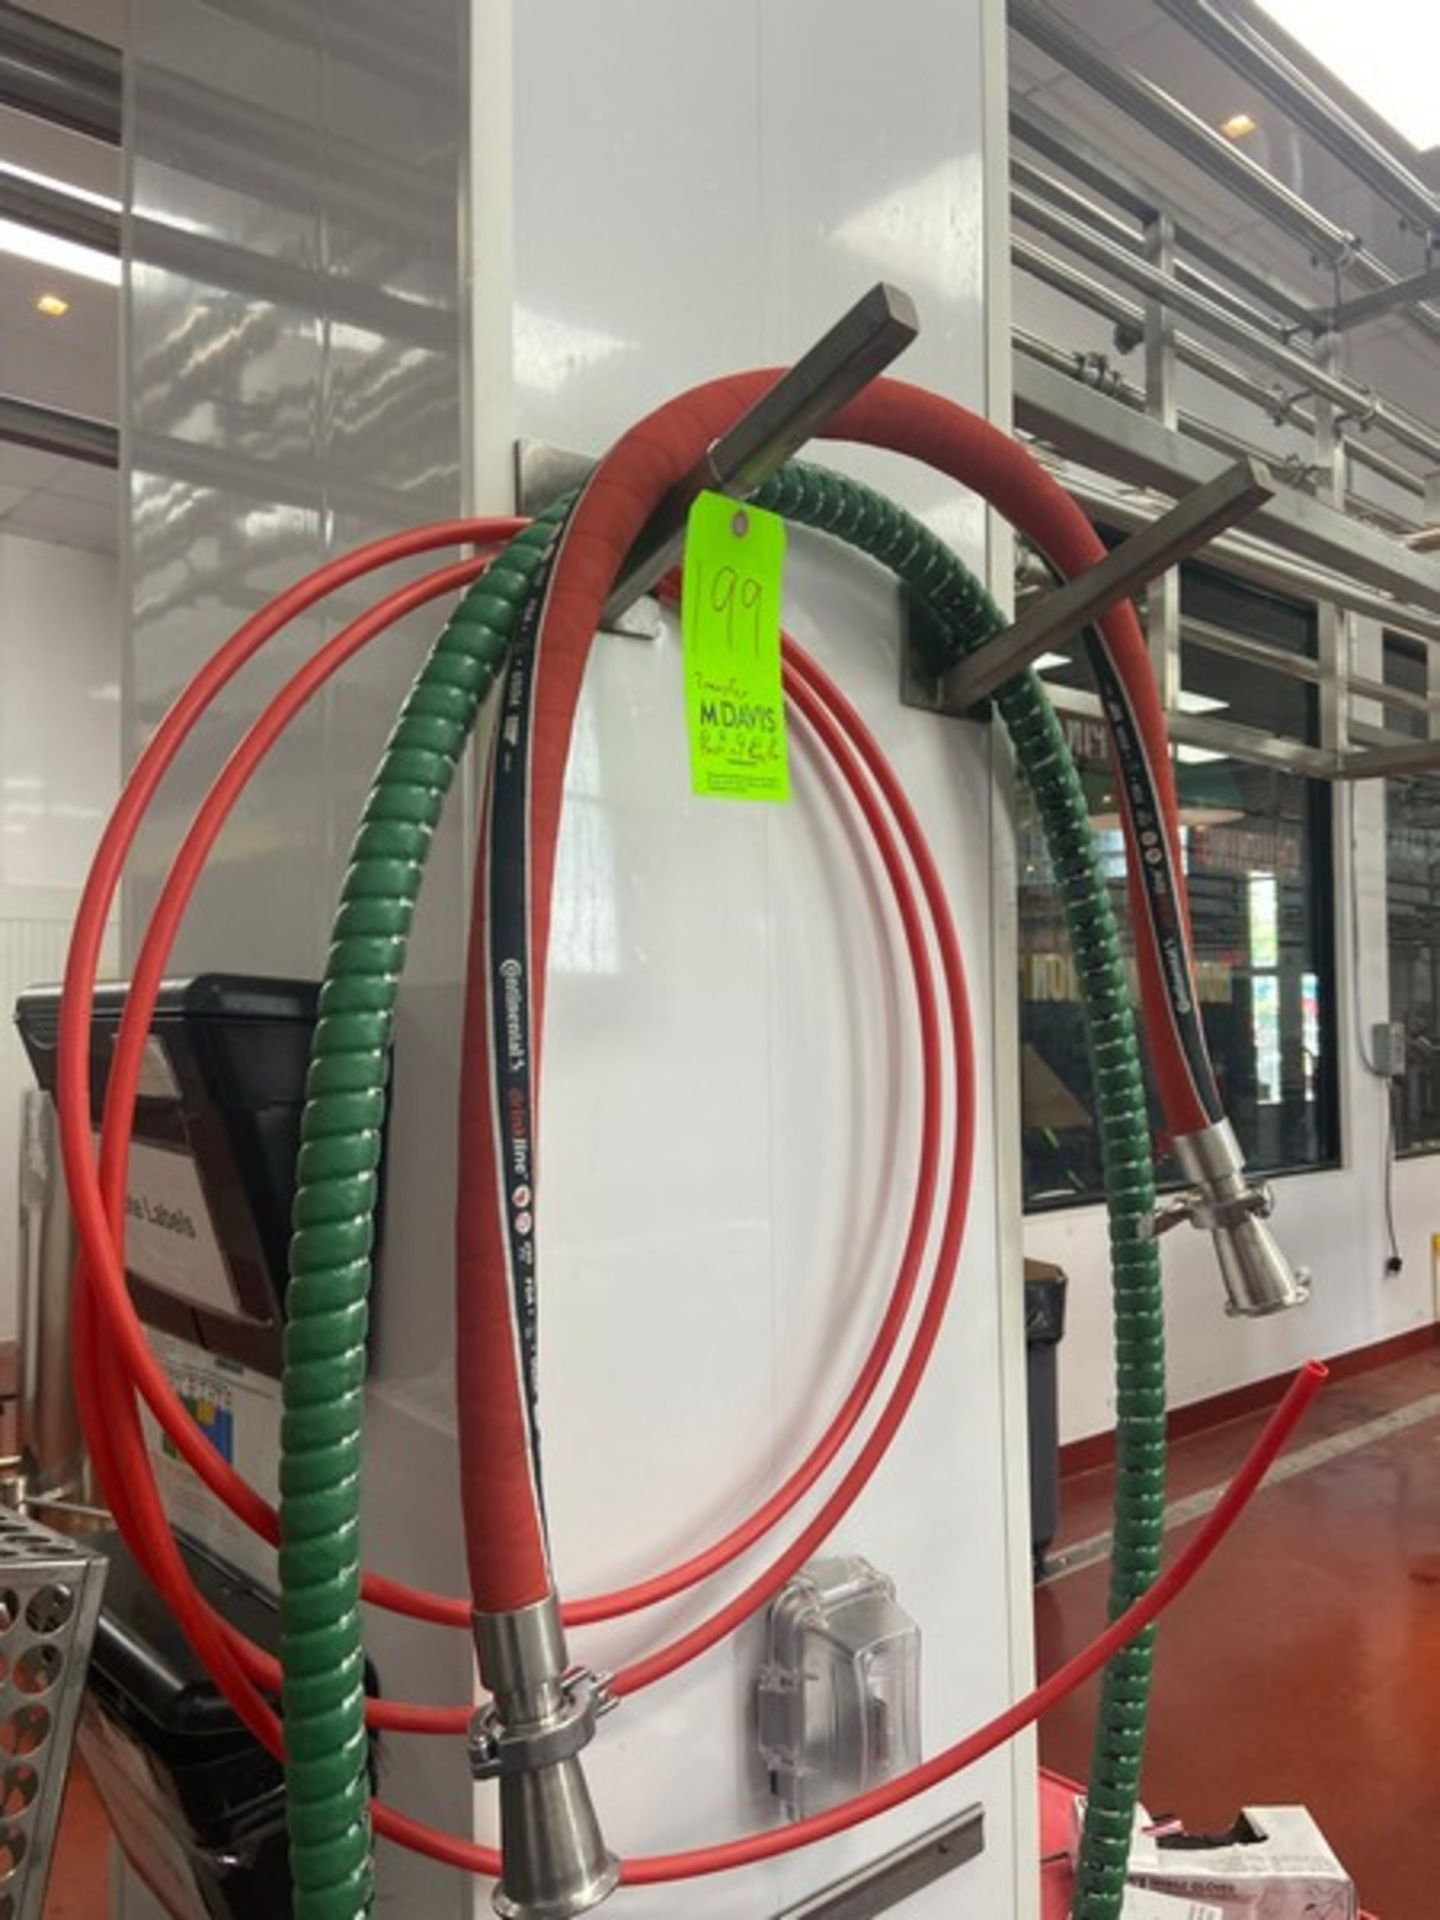 Transfer Hoses & S/S Wall Mounted Rack (LOCATED IN RED HOOK BROOKLYN, N.Y.) - Image 2 of 2